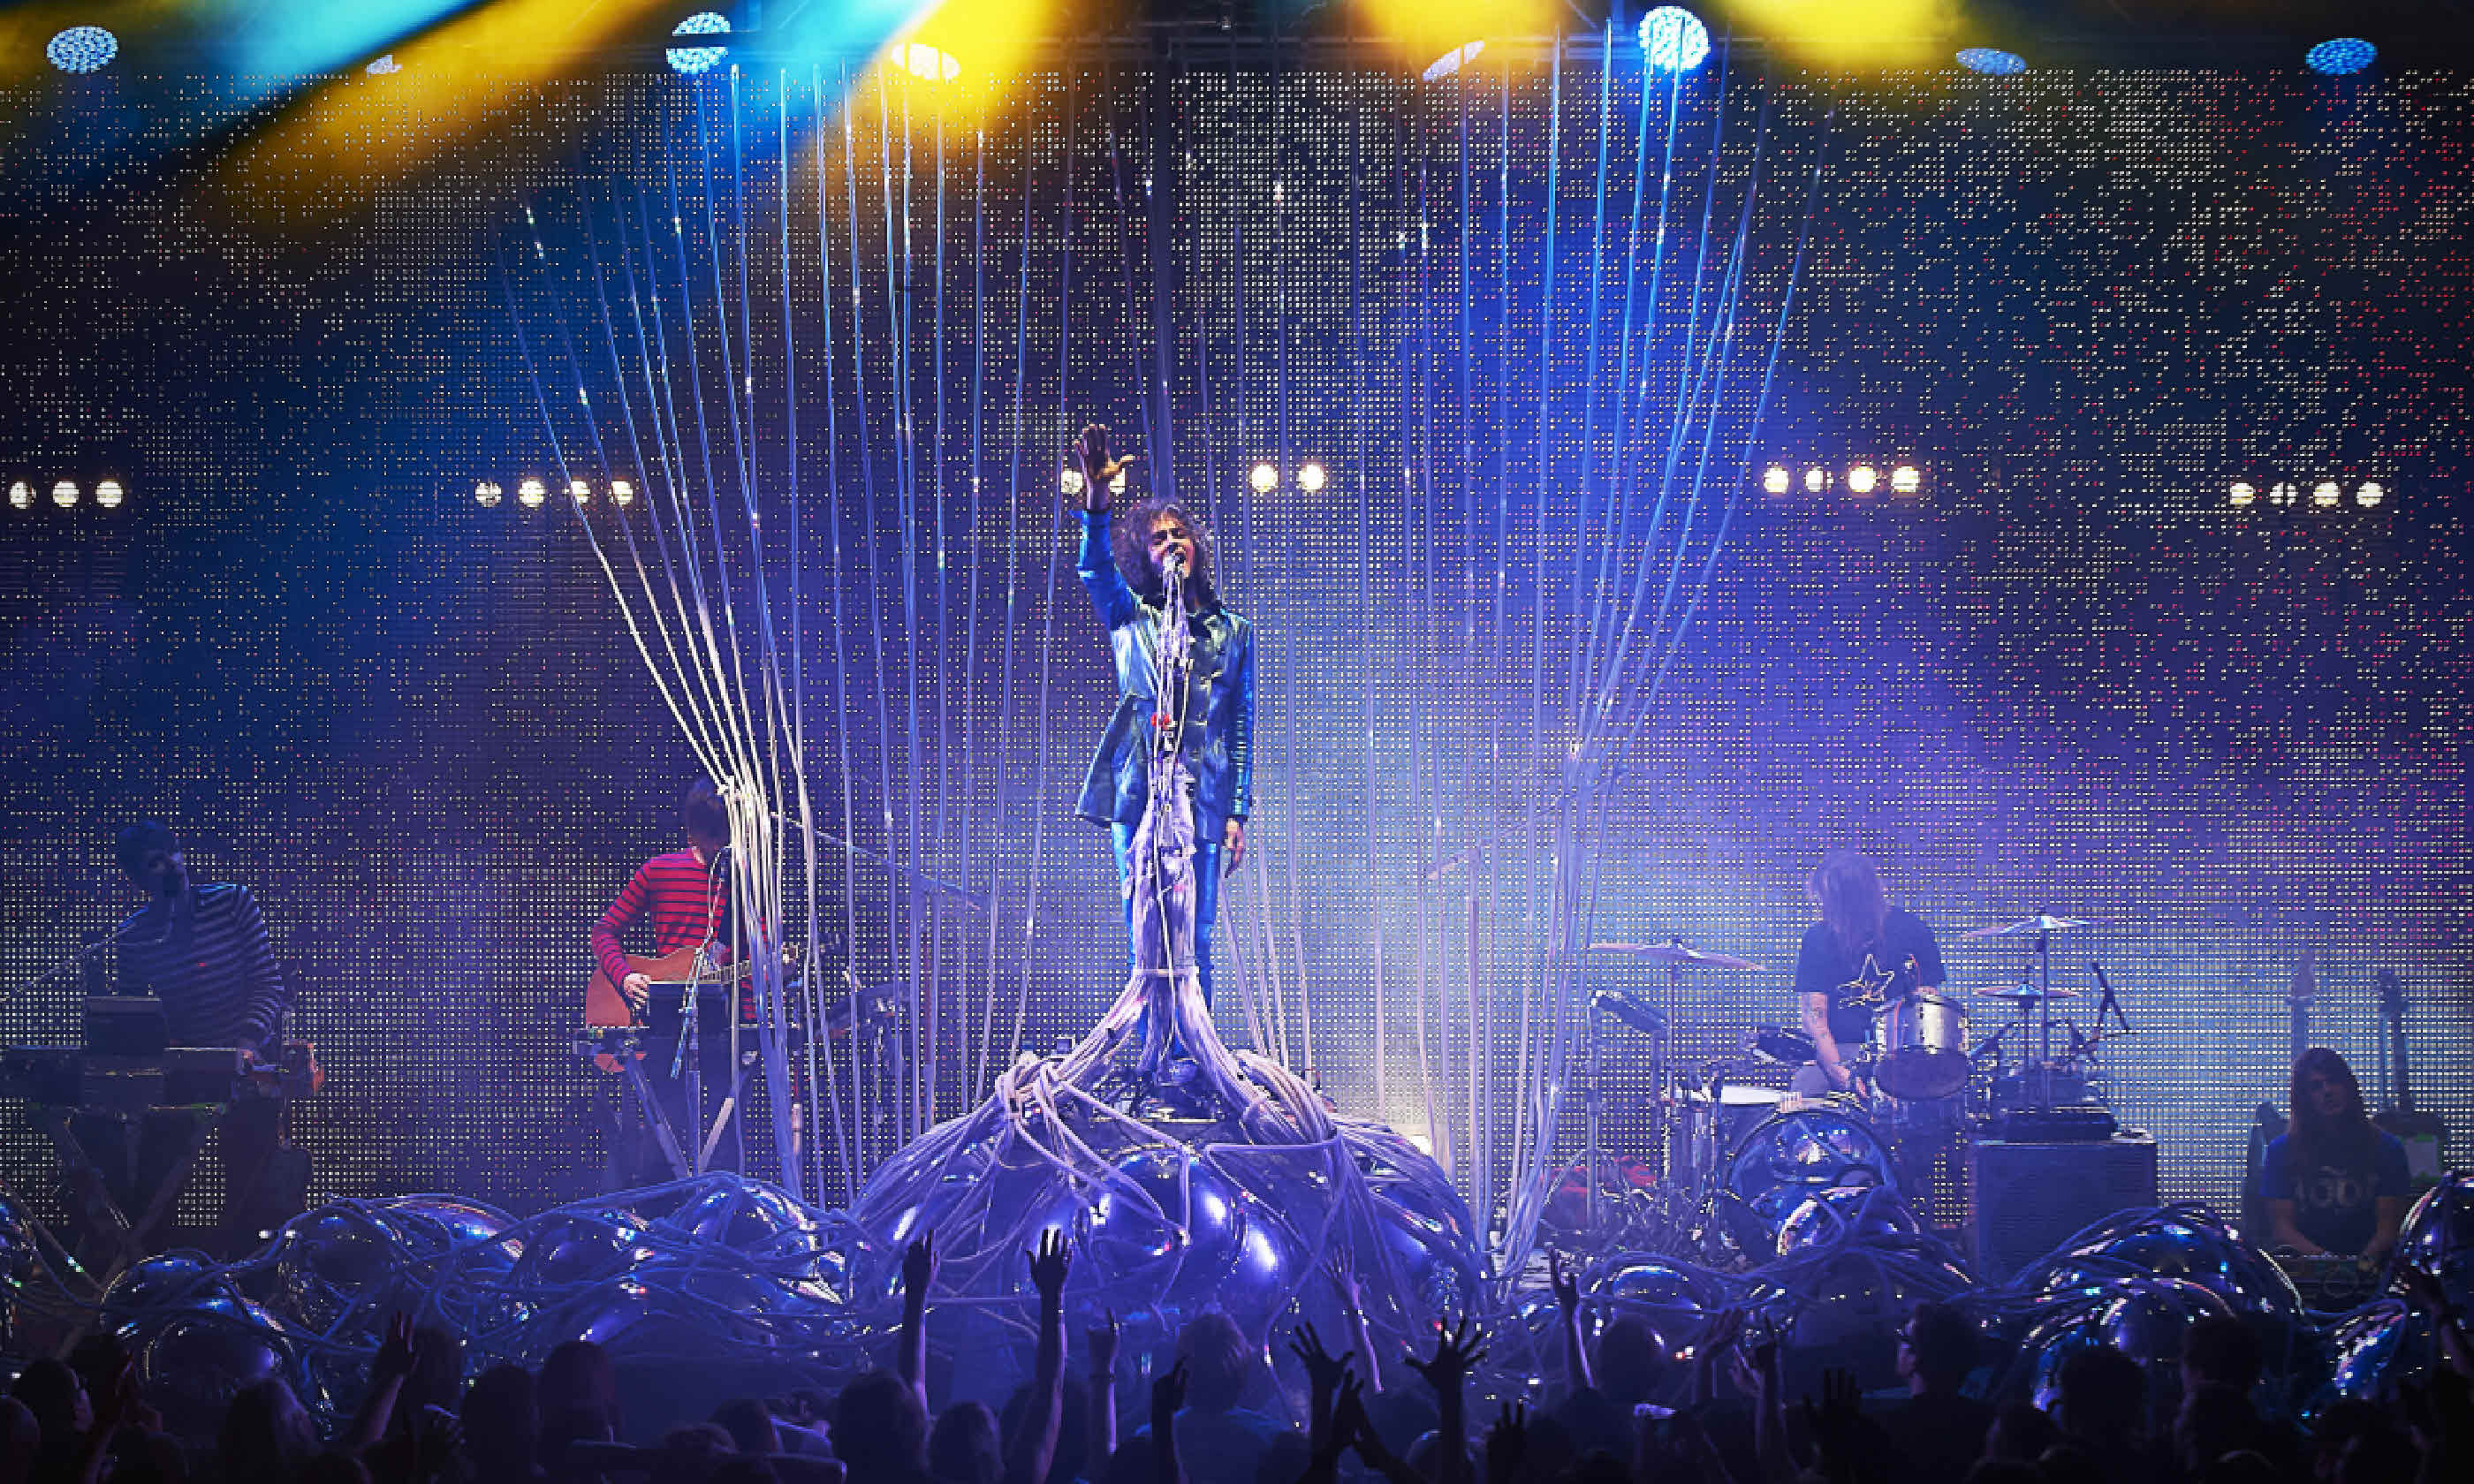 The Flaming Lips perform at The Roundhouse (Shutterstock)